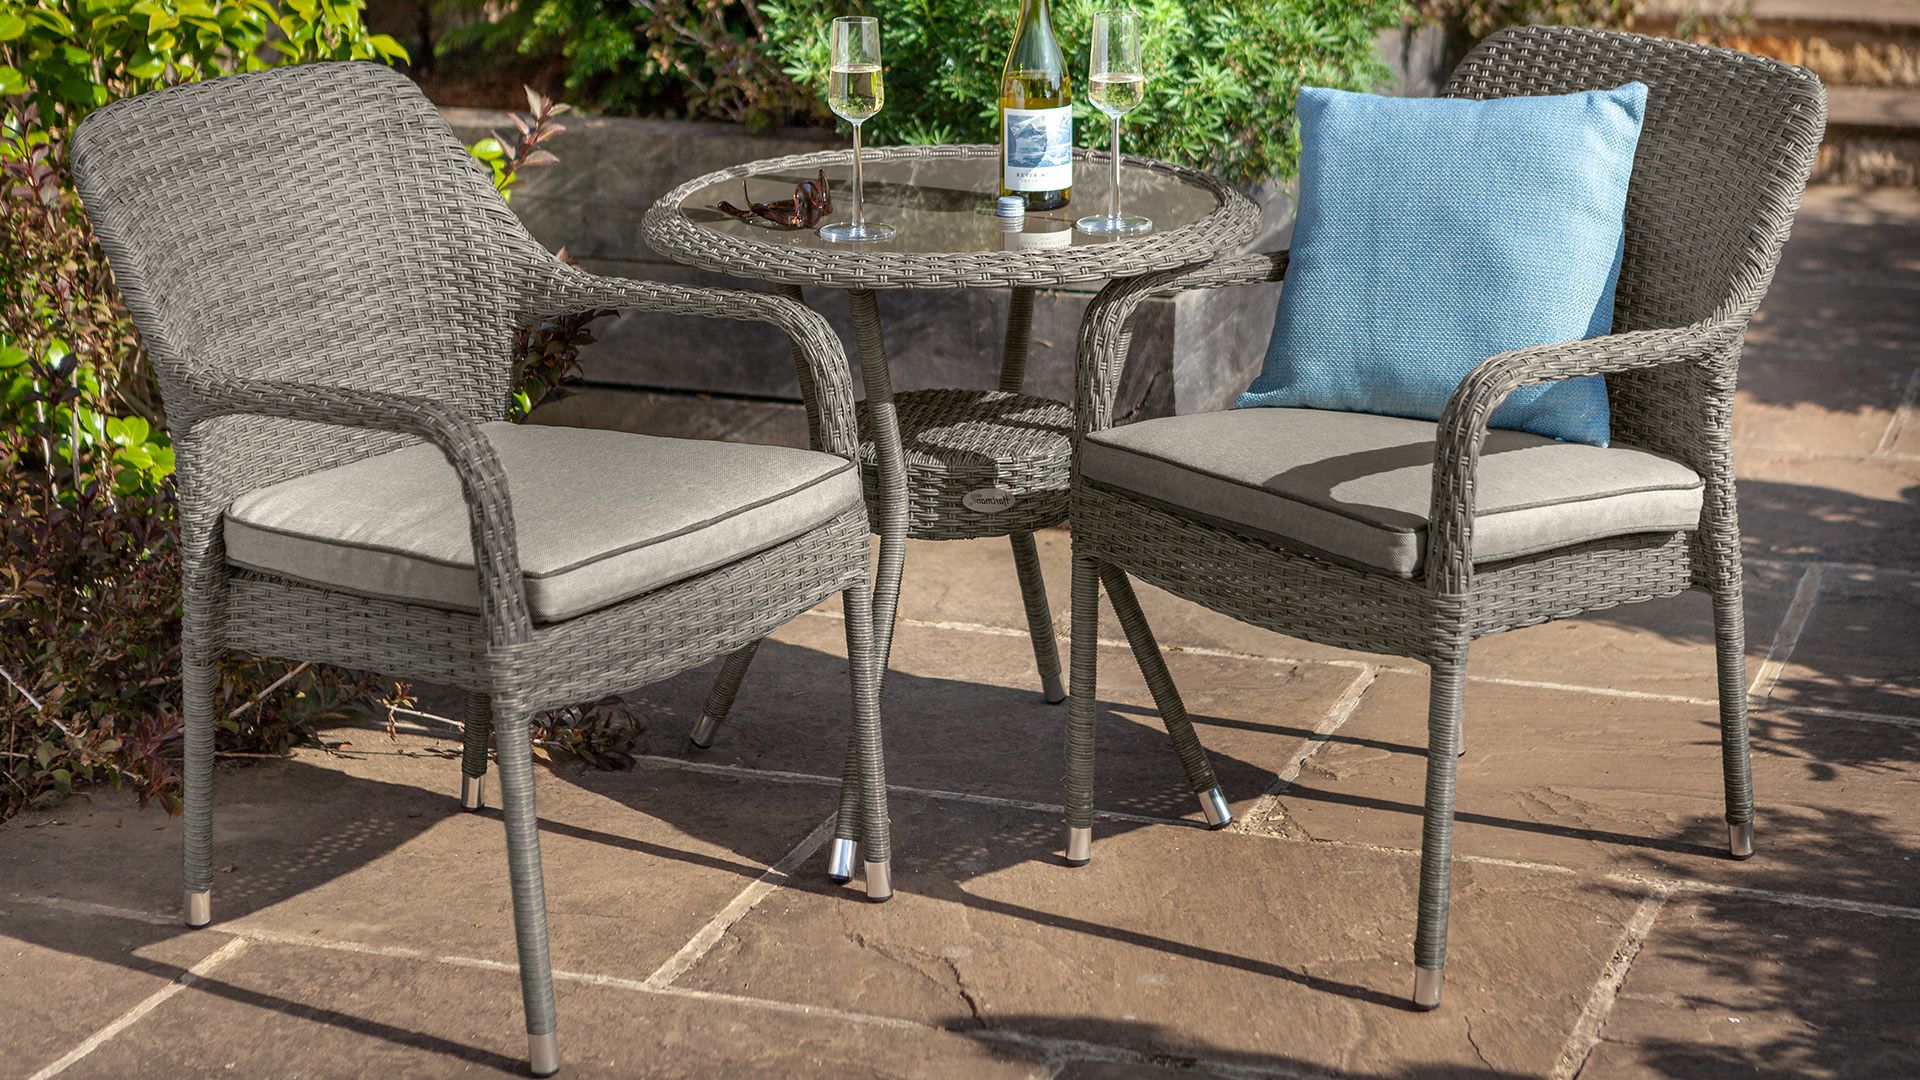 Most Up To Date Savoy Stacking Bistro Set Grey – Savoy – Wicker Garden Furniture Inside Gray Wash Wood Porch Patio Chairs Sets (View 14 of 15)